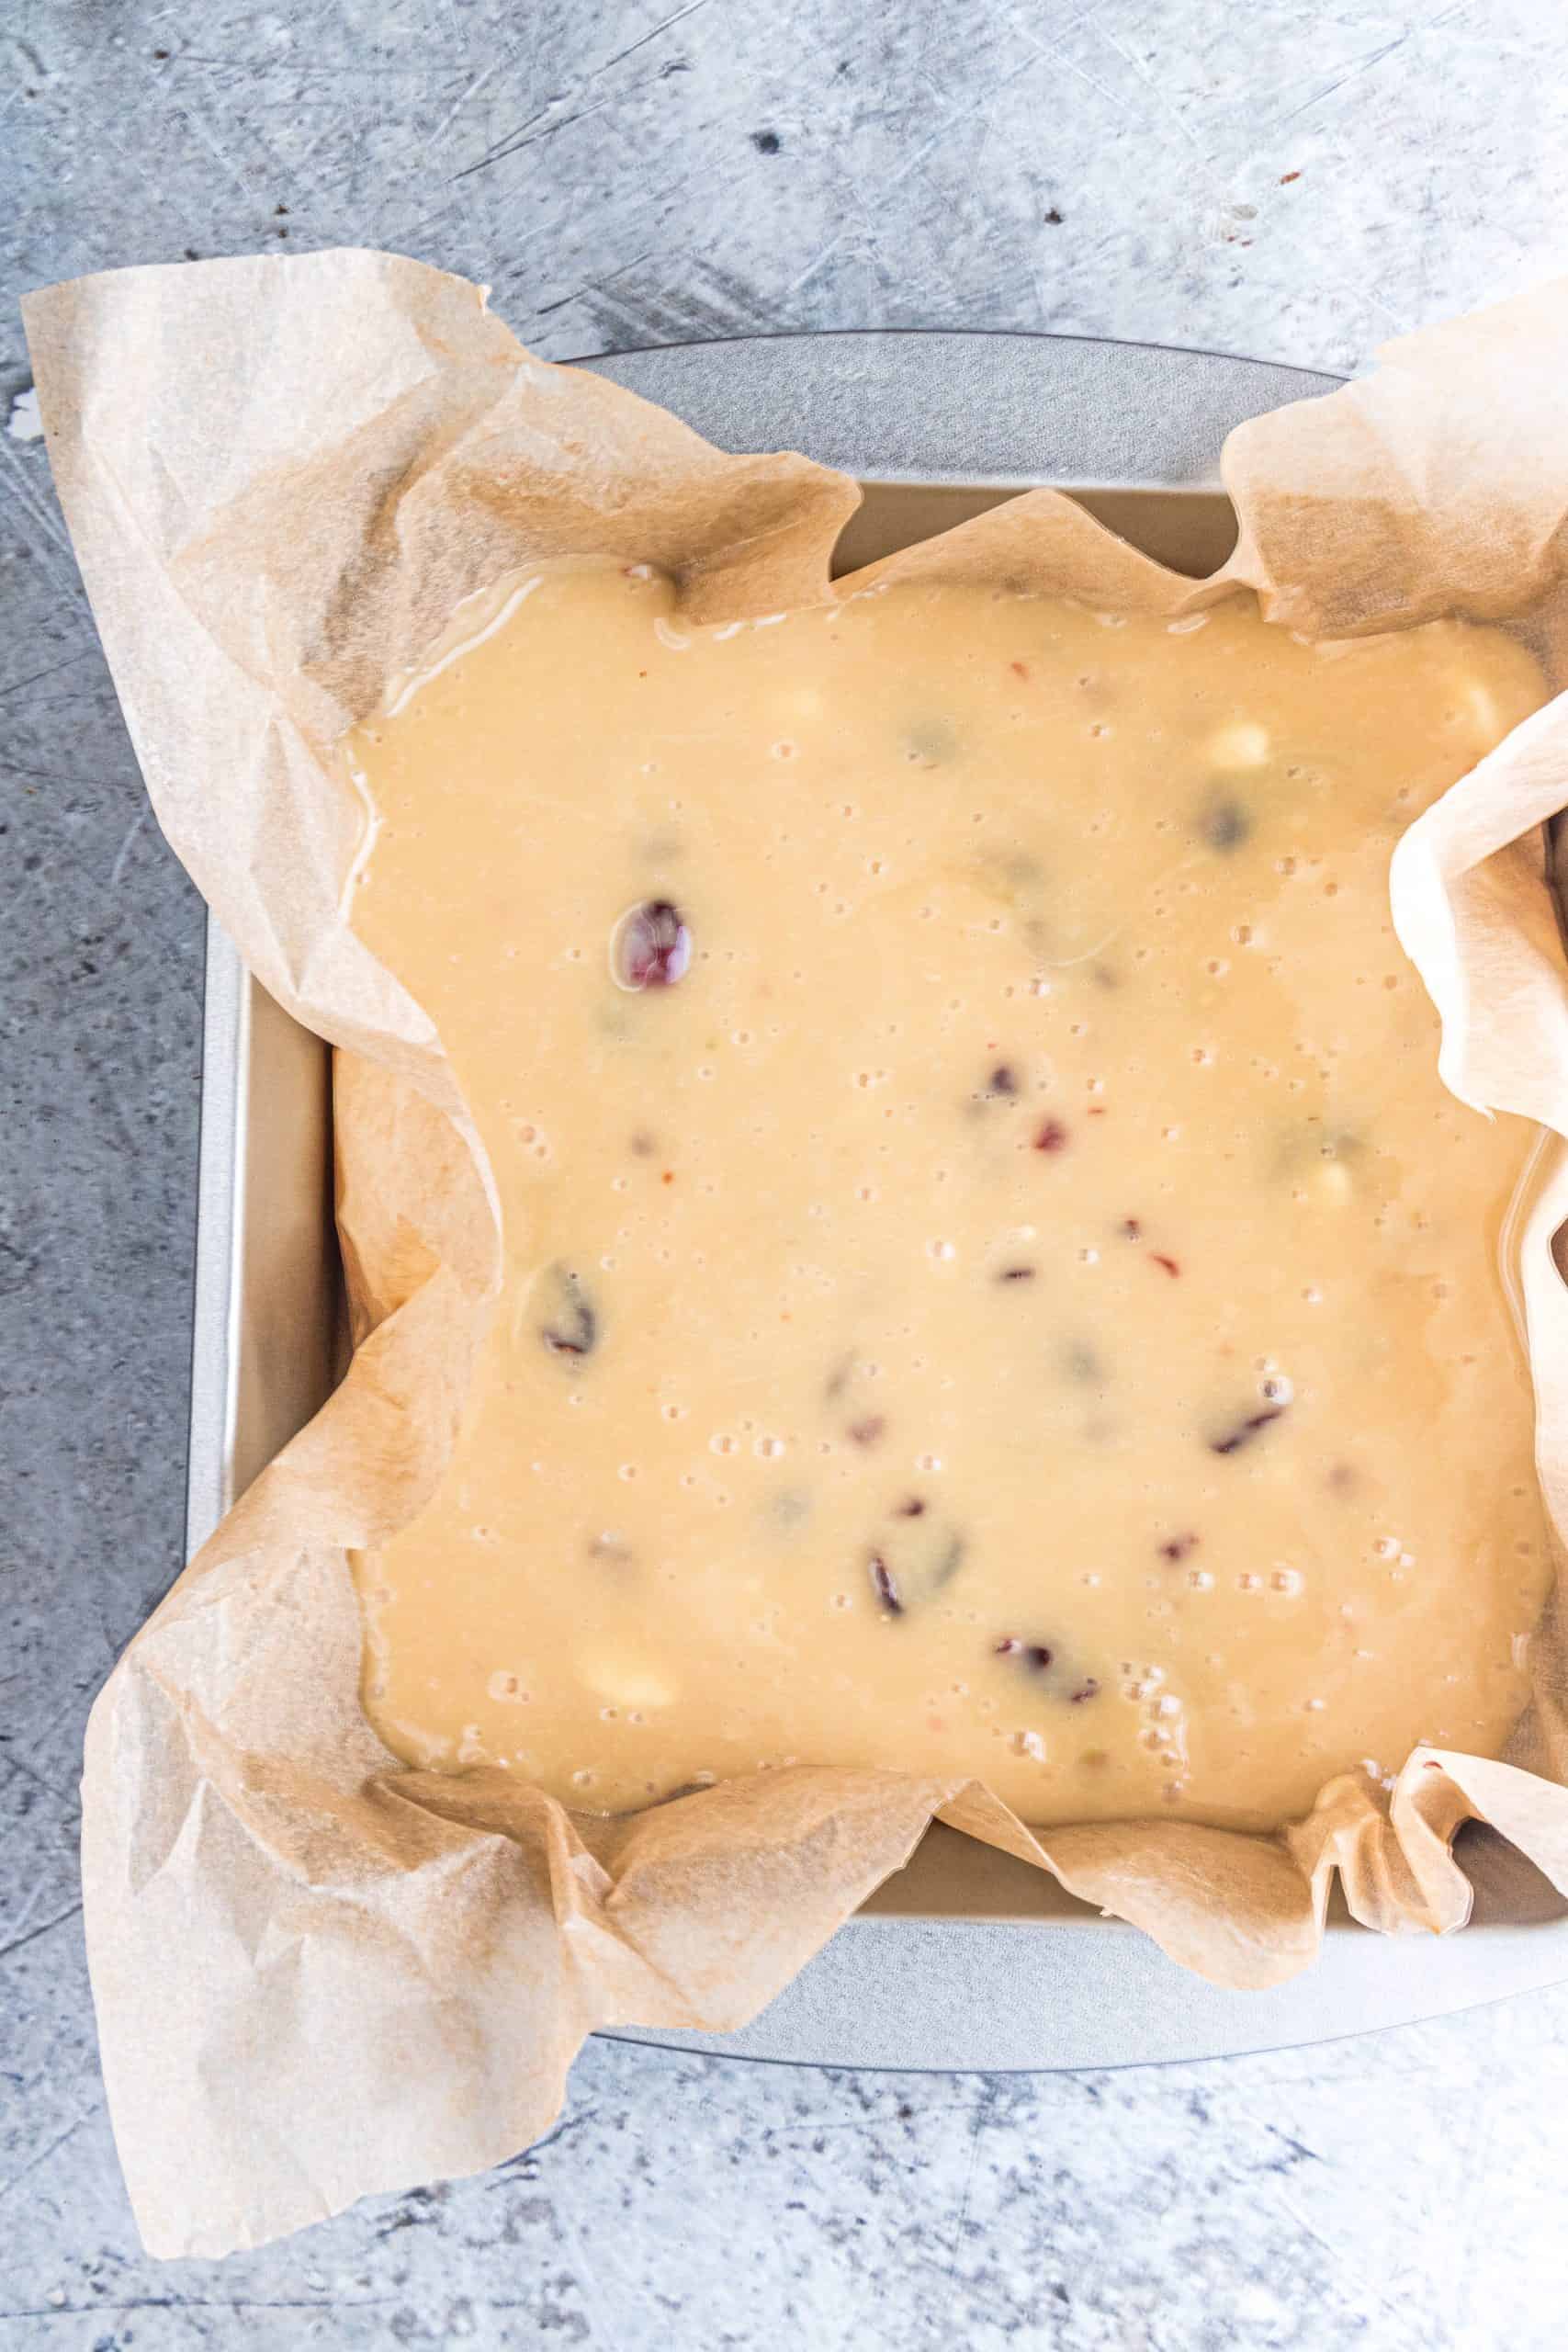 white chocolate fudge batter poured into a parchment paper lined baking pan.